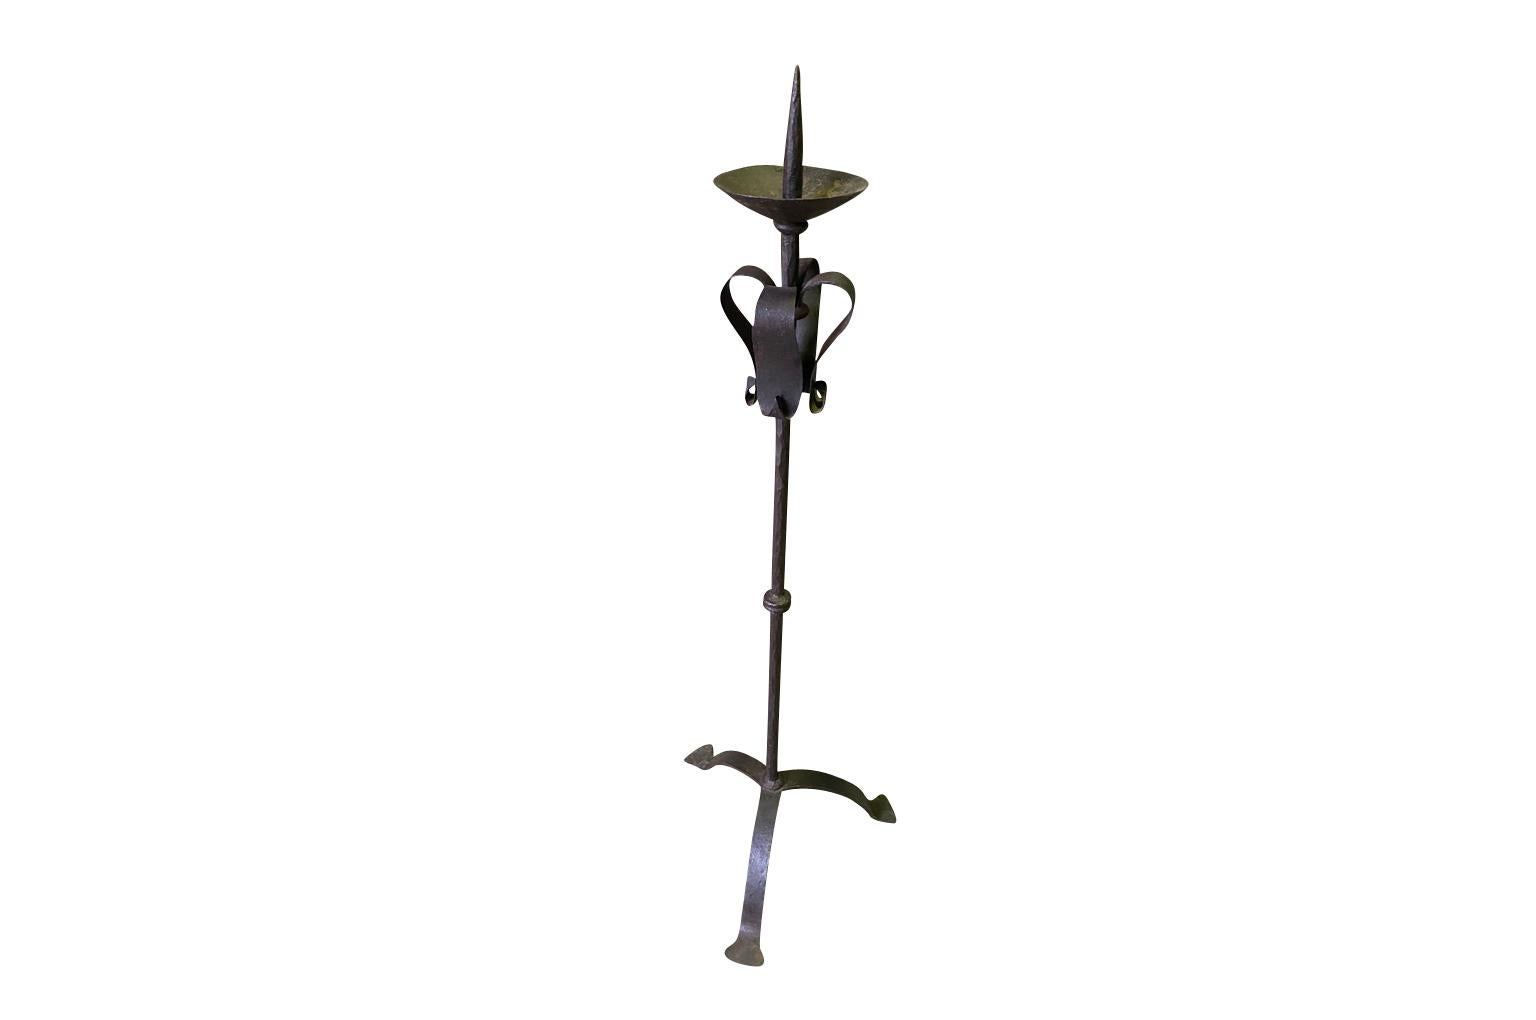 A very handsome 18th century Pique Cierge - Floor Candle Stand from the Lombardy region of Italy.  Wonderfully crafted from hand forged iron.  Understated and elegant.